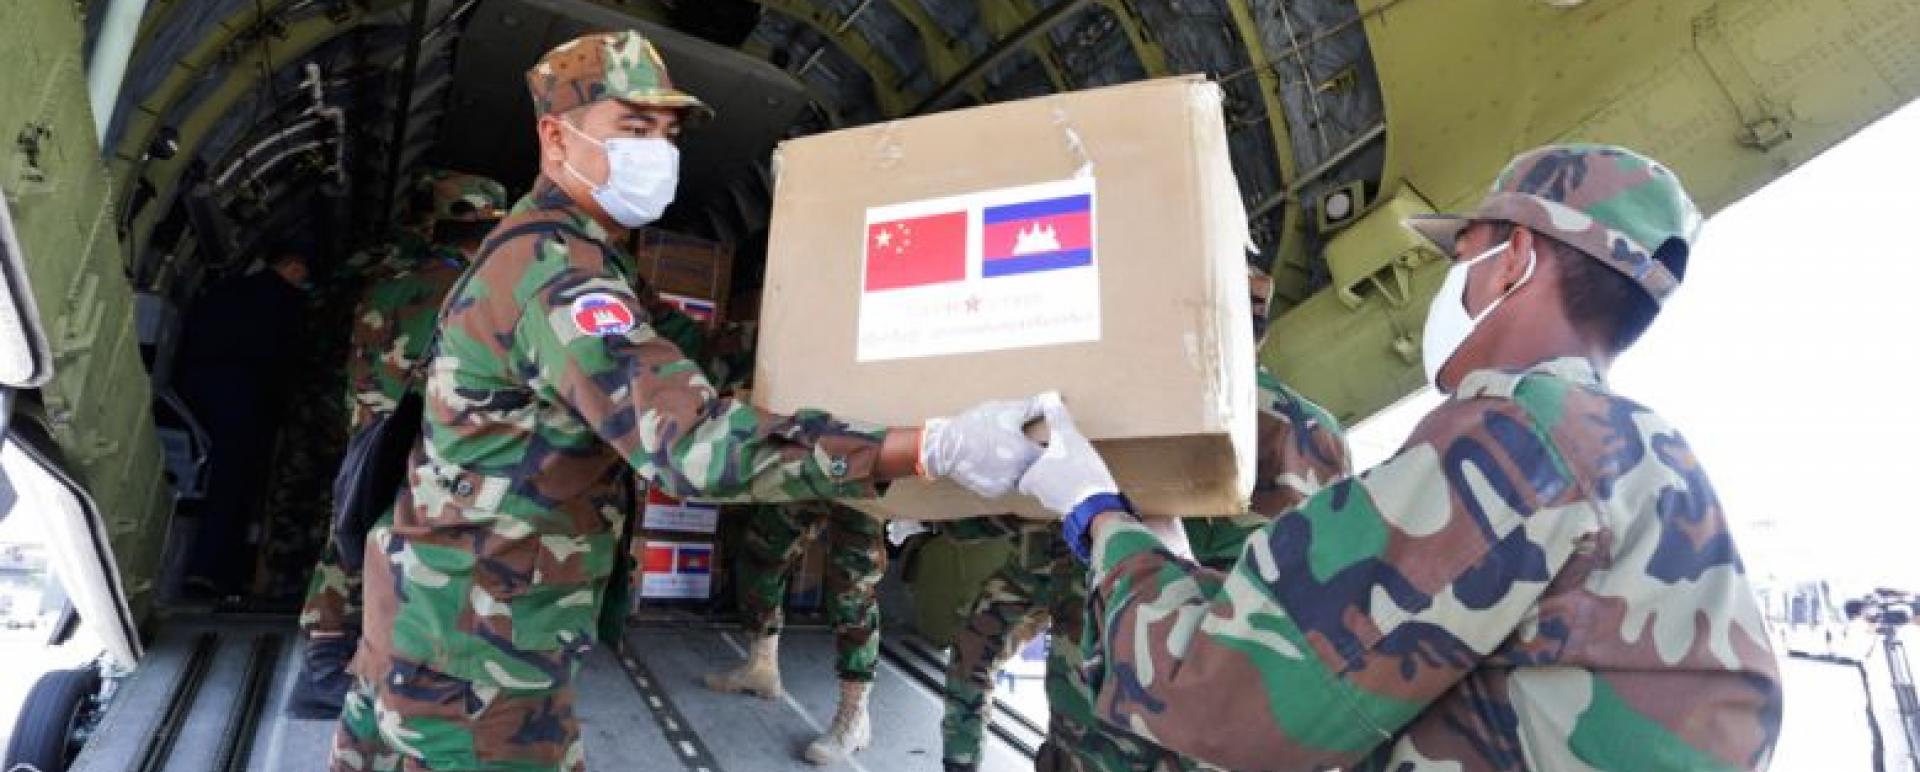 China’s Ministry of Defence donated 16 tonnes of medical supplies to Cambodia on Saturday. Heng Chivoan